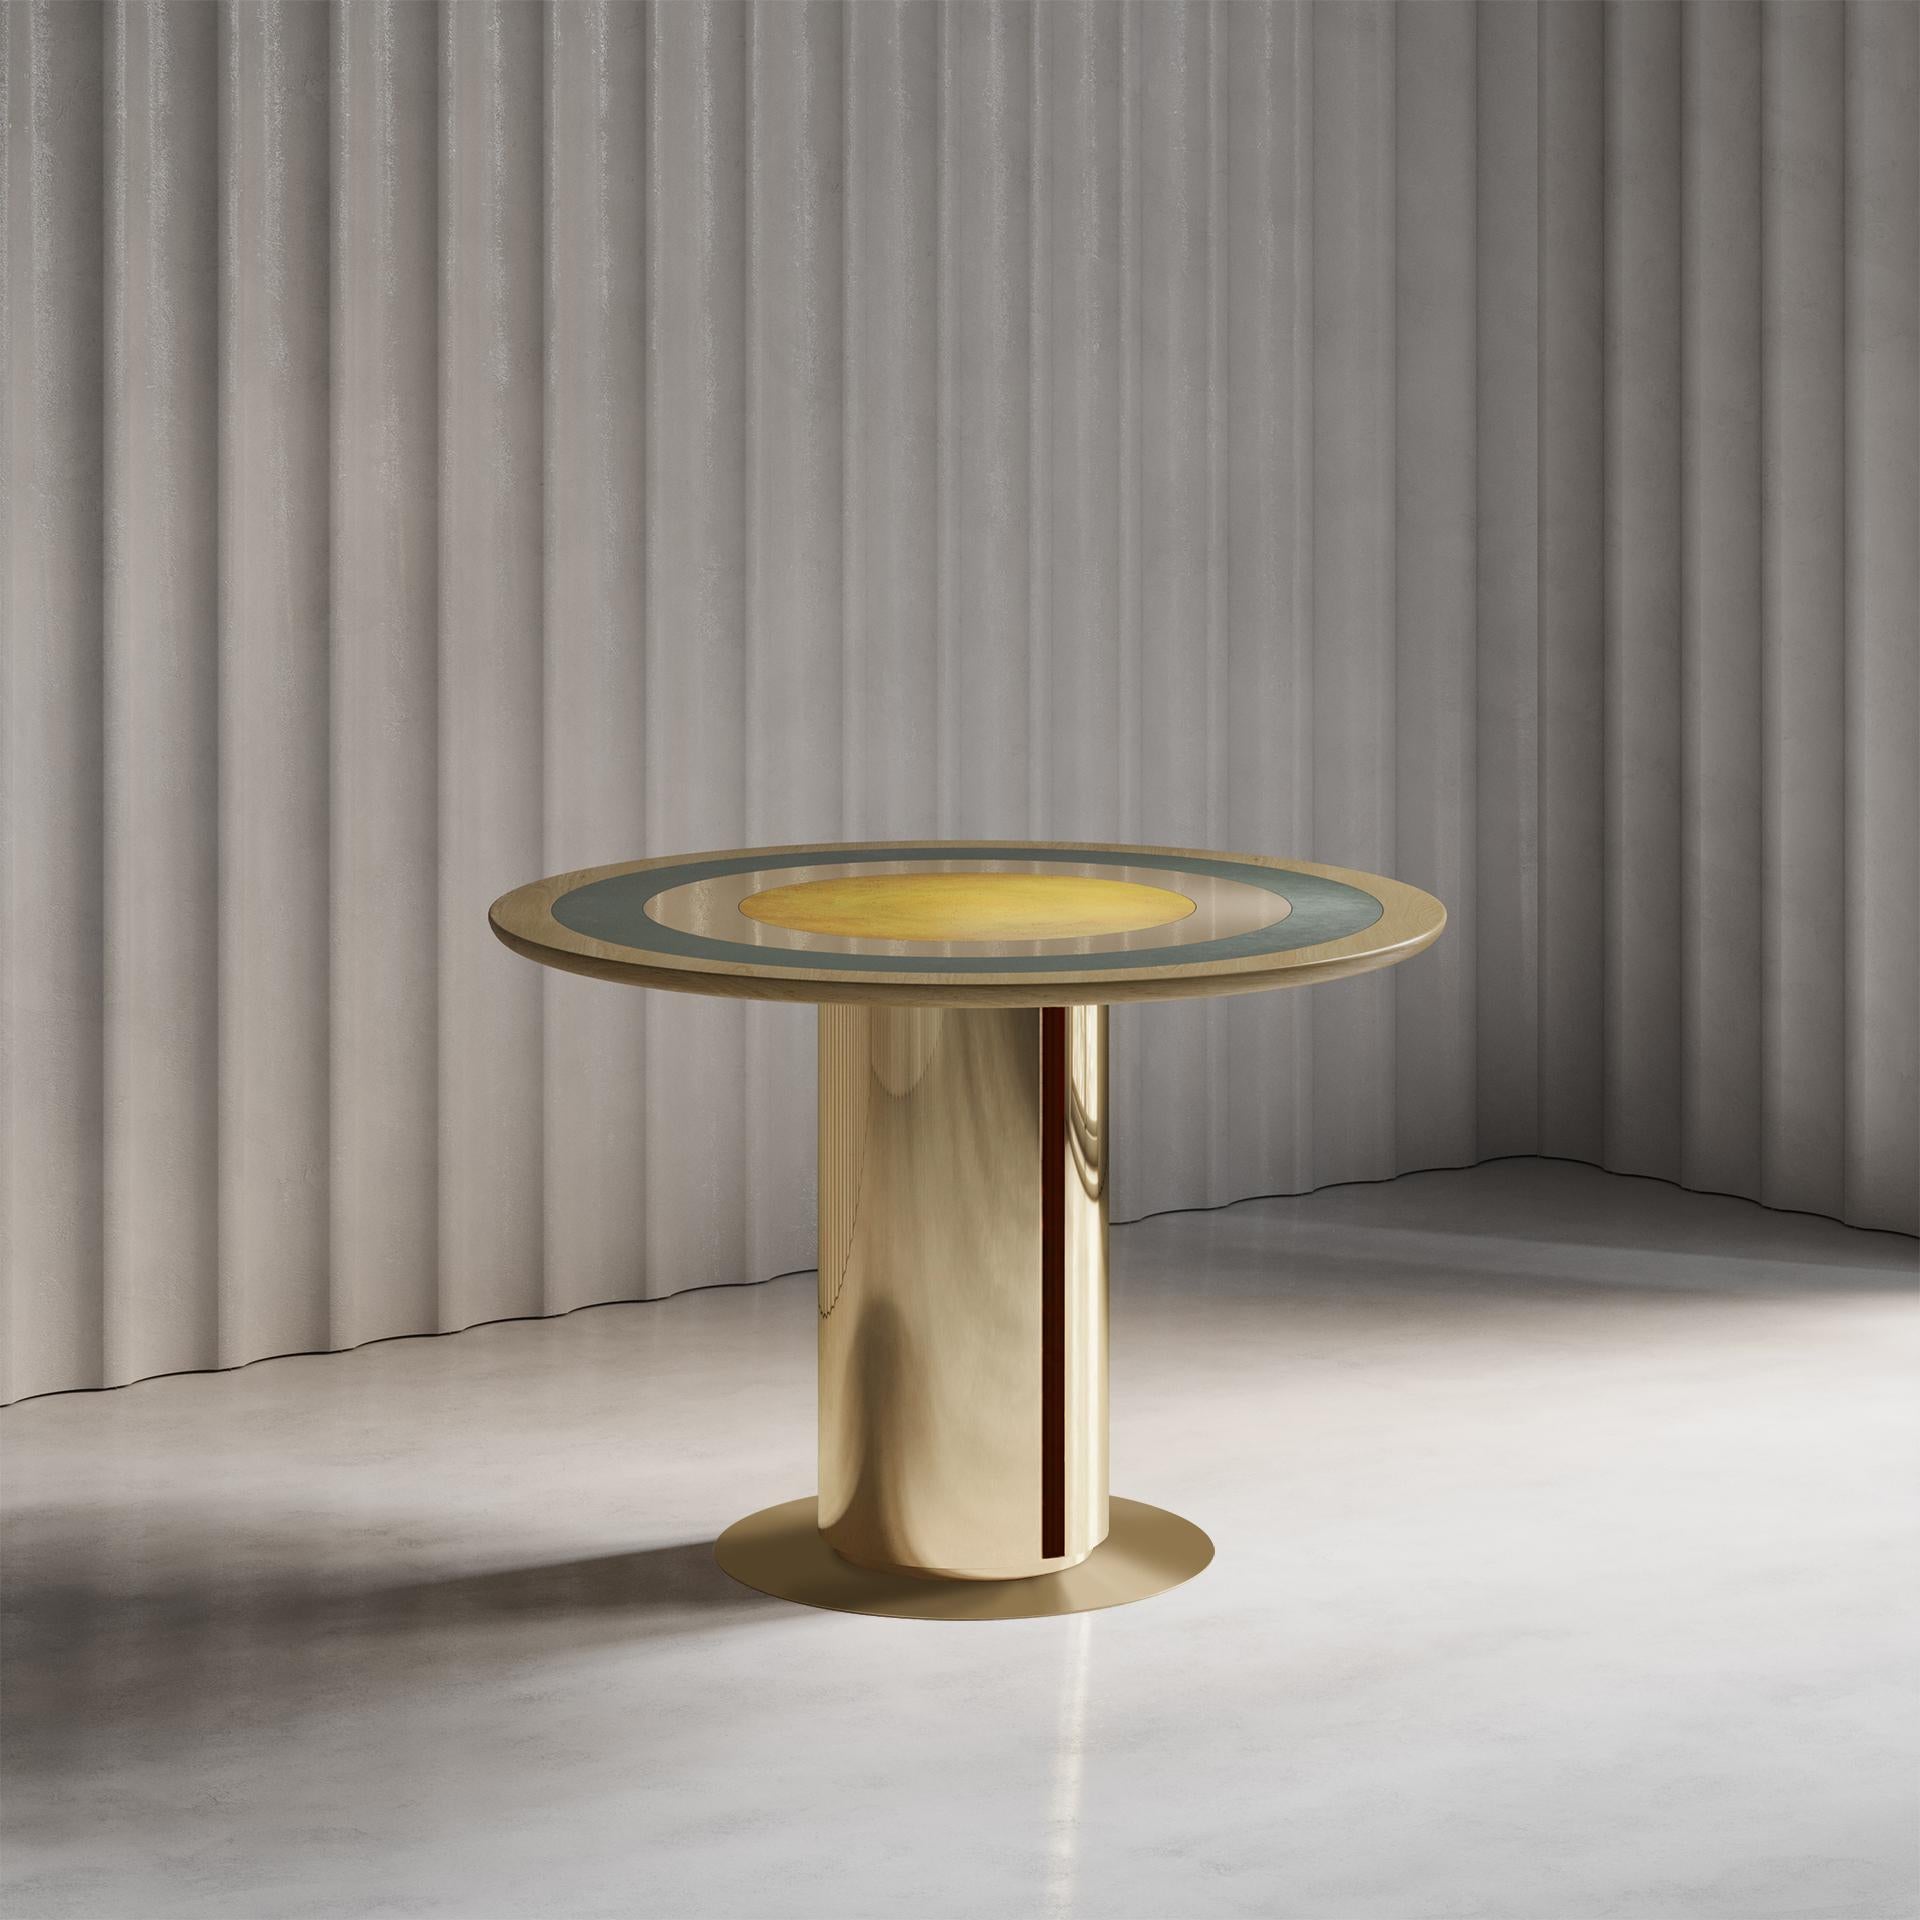 English 'Carousel Dining Table Aurum' Solid Sycamore, Polished Brass Dining Table For Sale